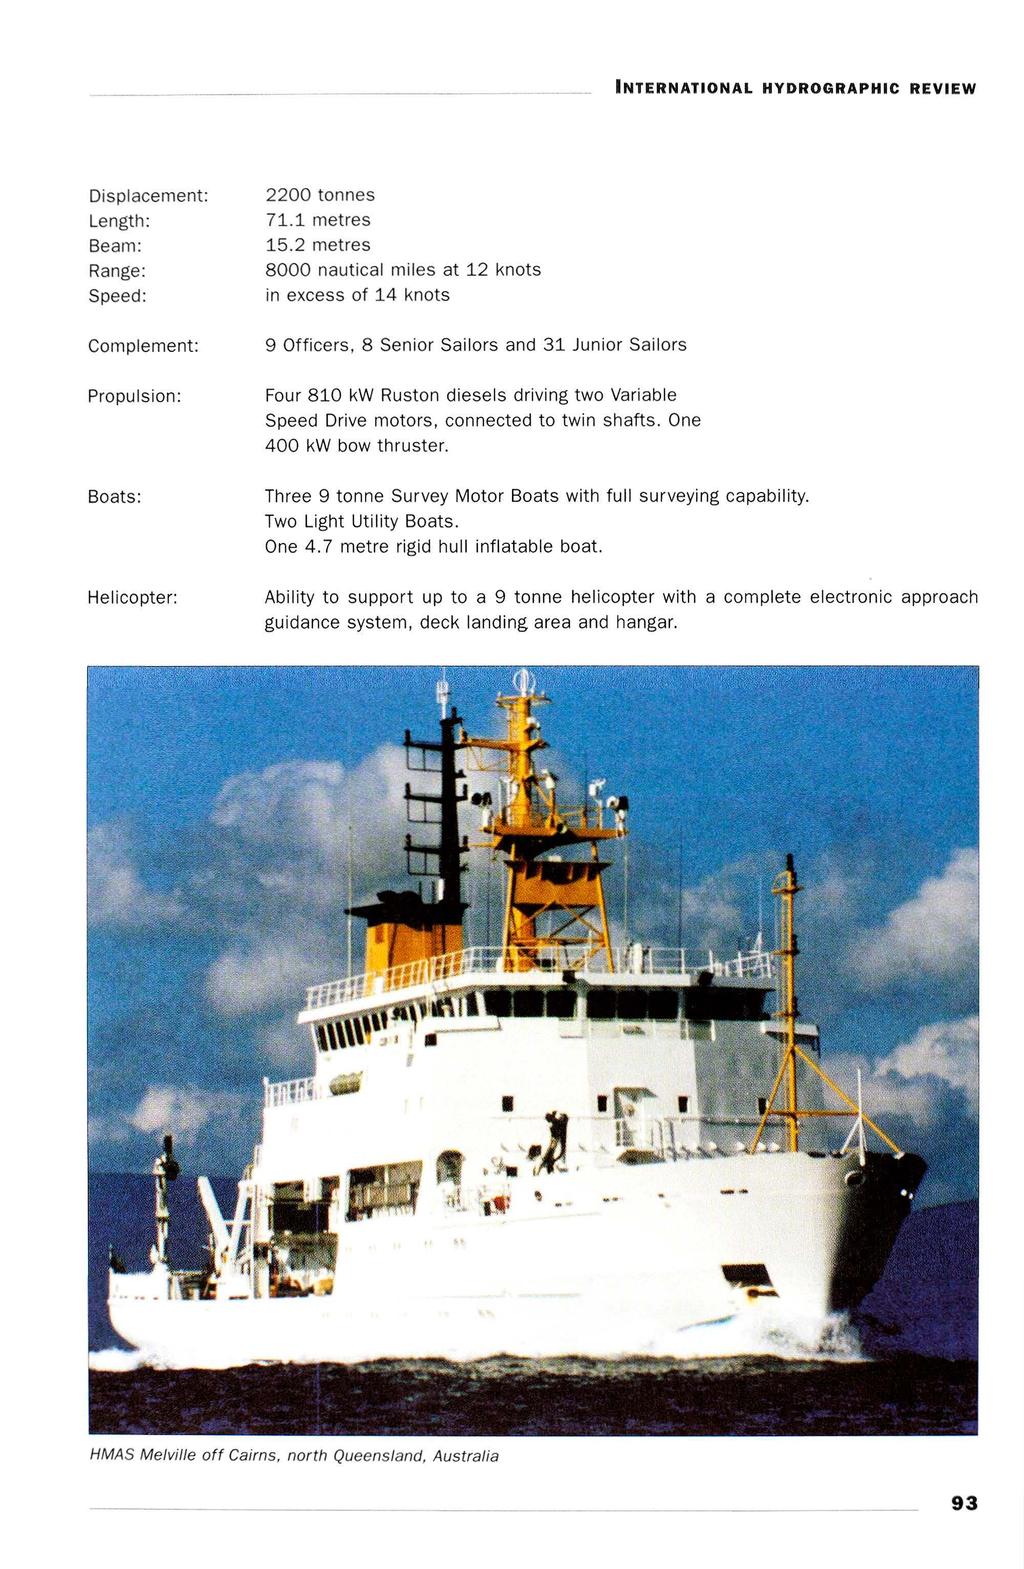 Displacement: Length: Beam: Range: Speed: Complement: Propulsion: Boats: Helicopter: 2200 tonnes 71.1 metres 15.